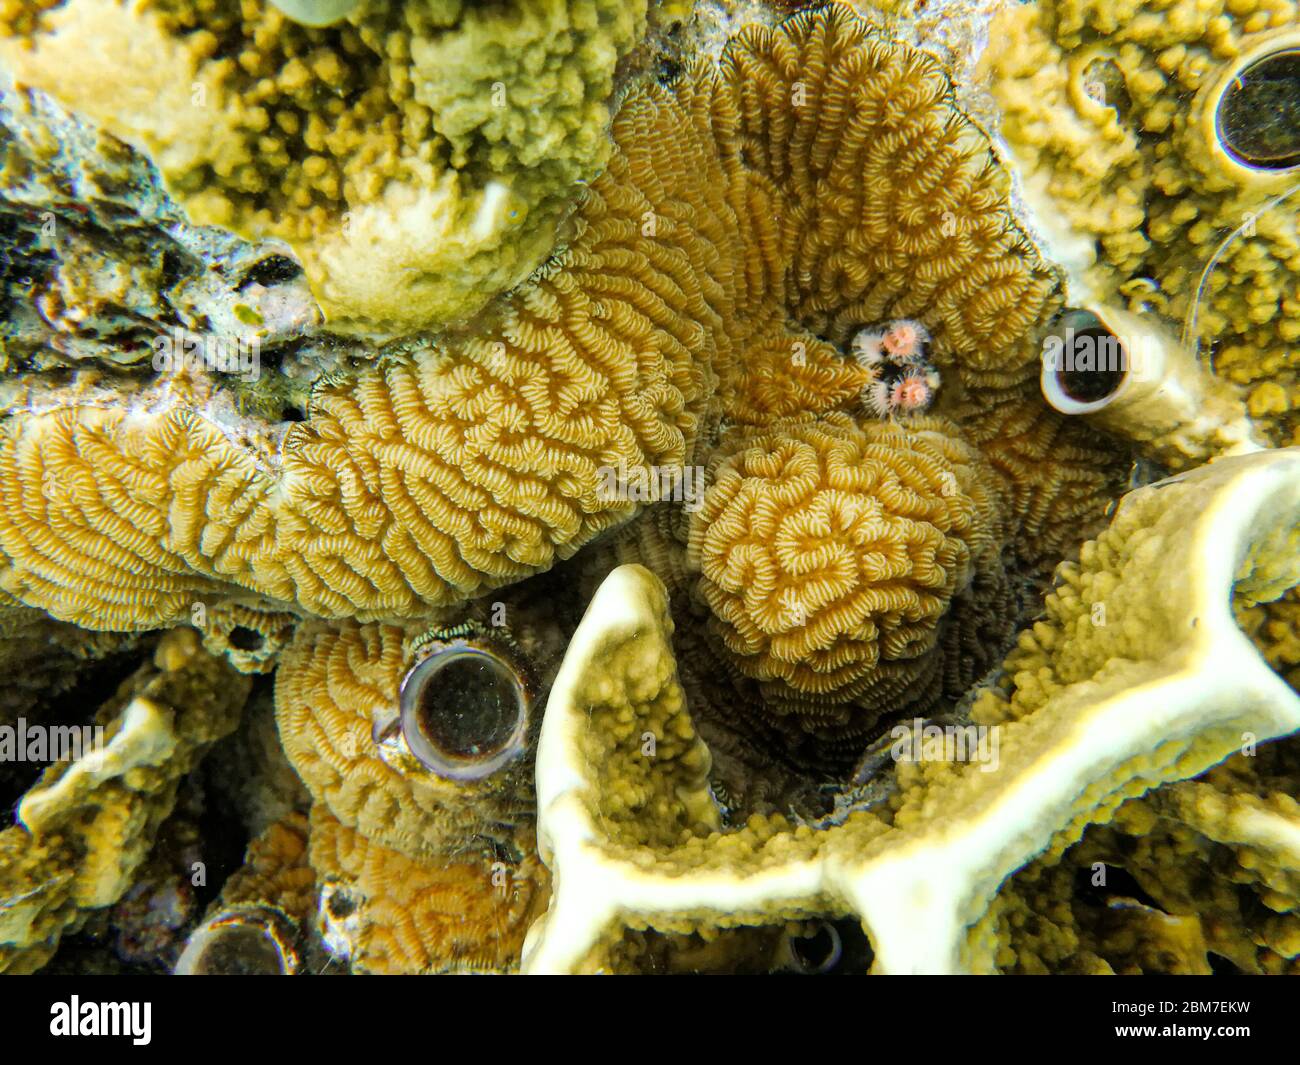 Coral reef close-up in the sea. Stock Photo